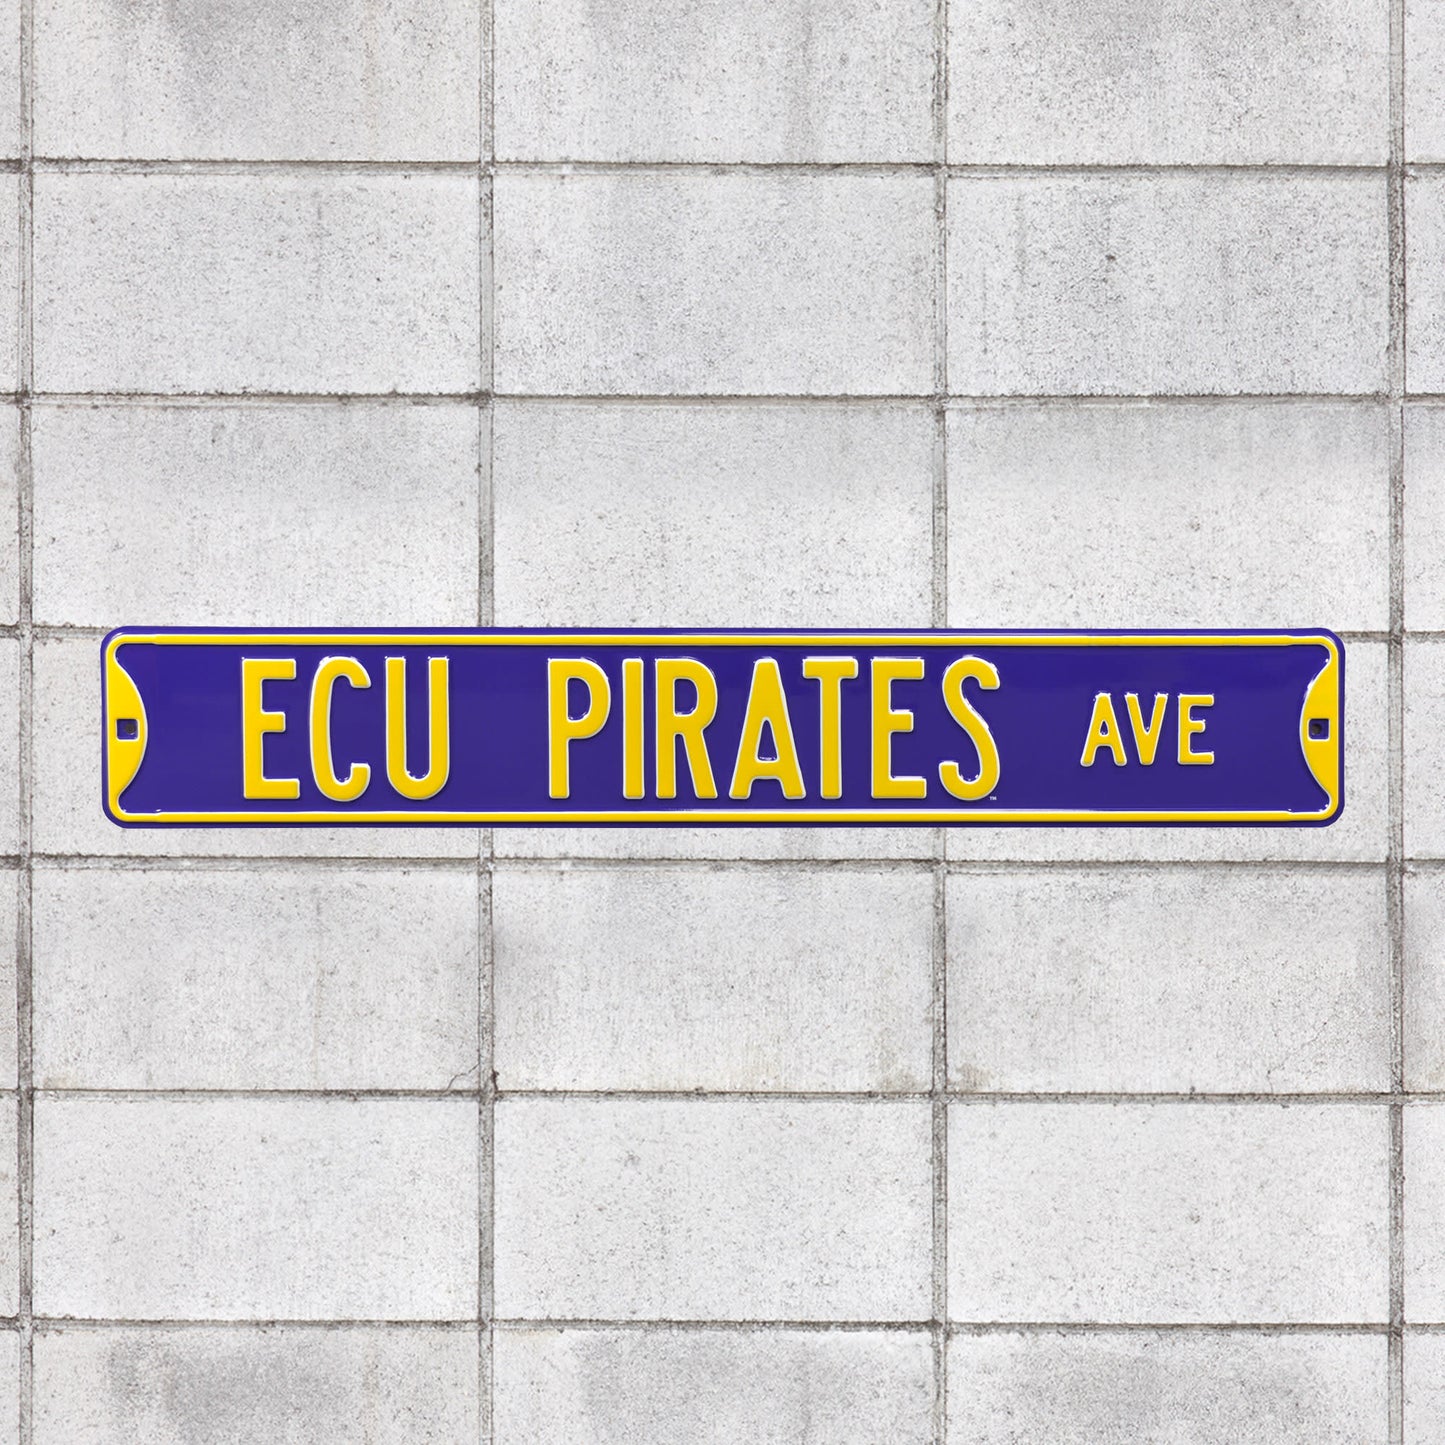 East Carolina Pirates: East Carolina Pirates Avenue - Officially Licensed Metal Street Sign